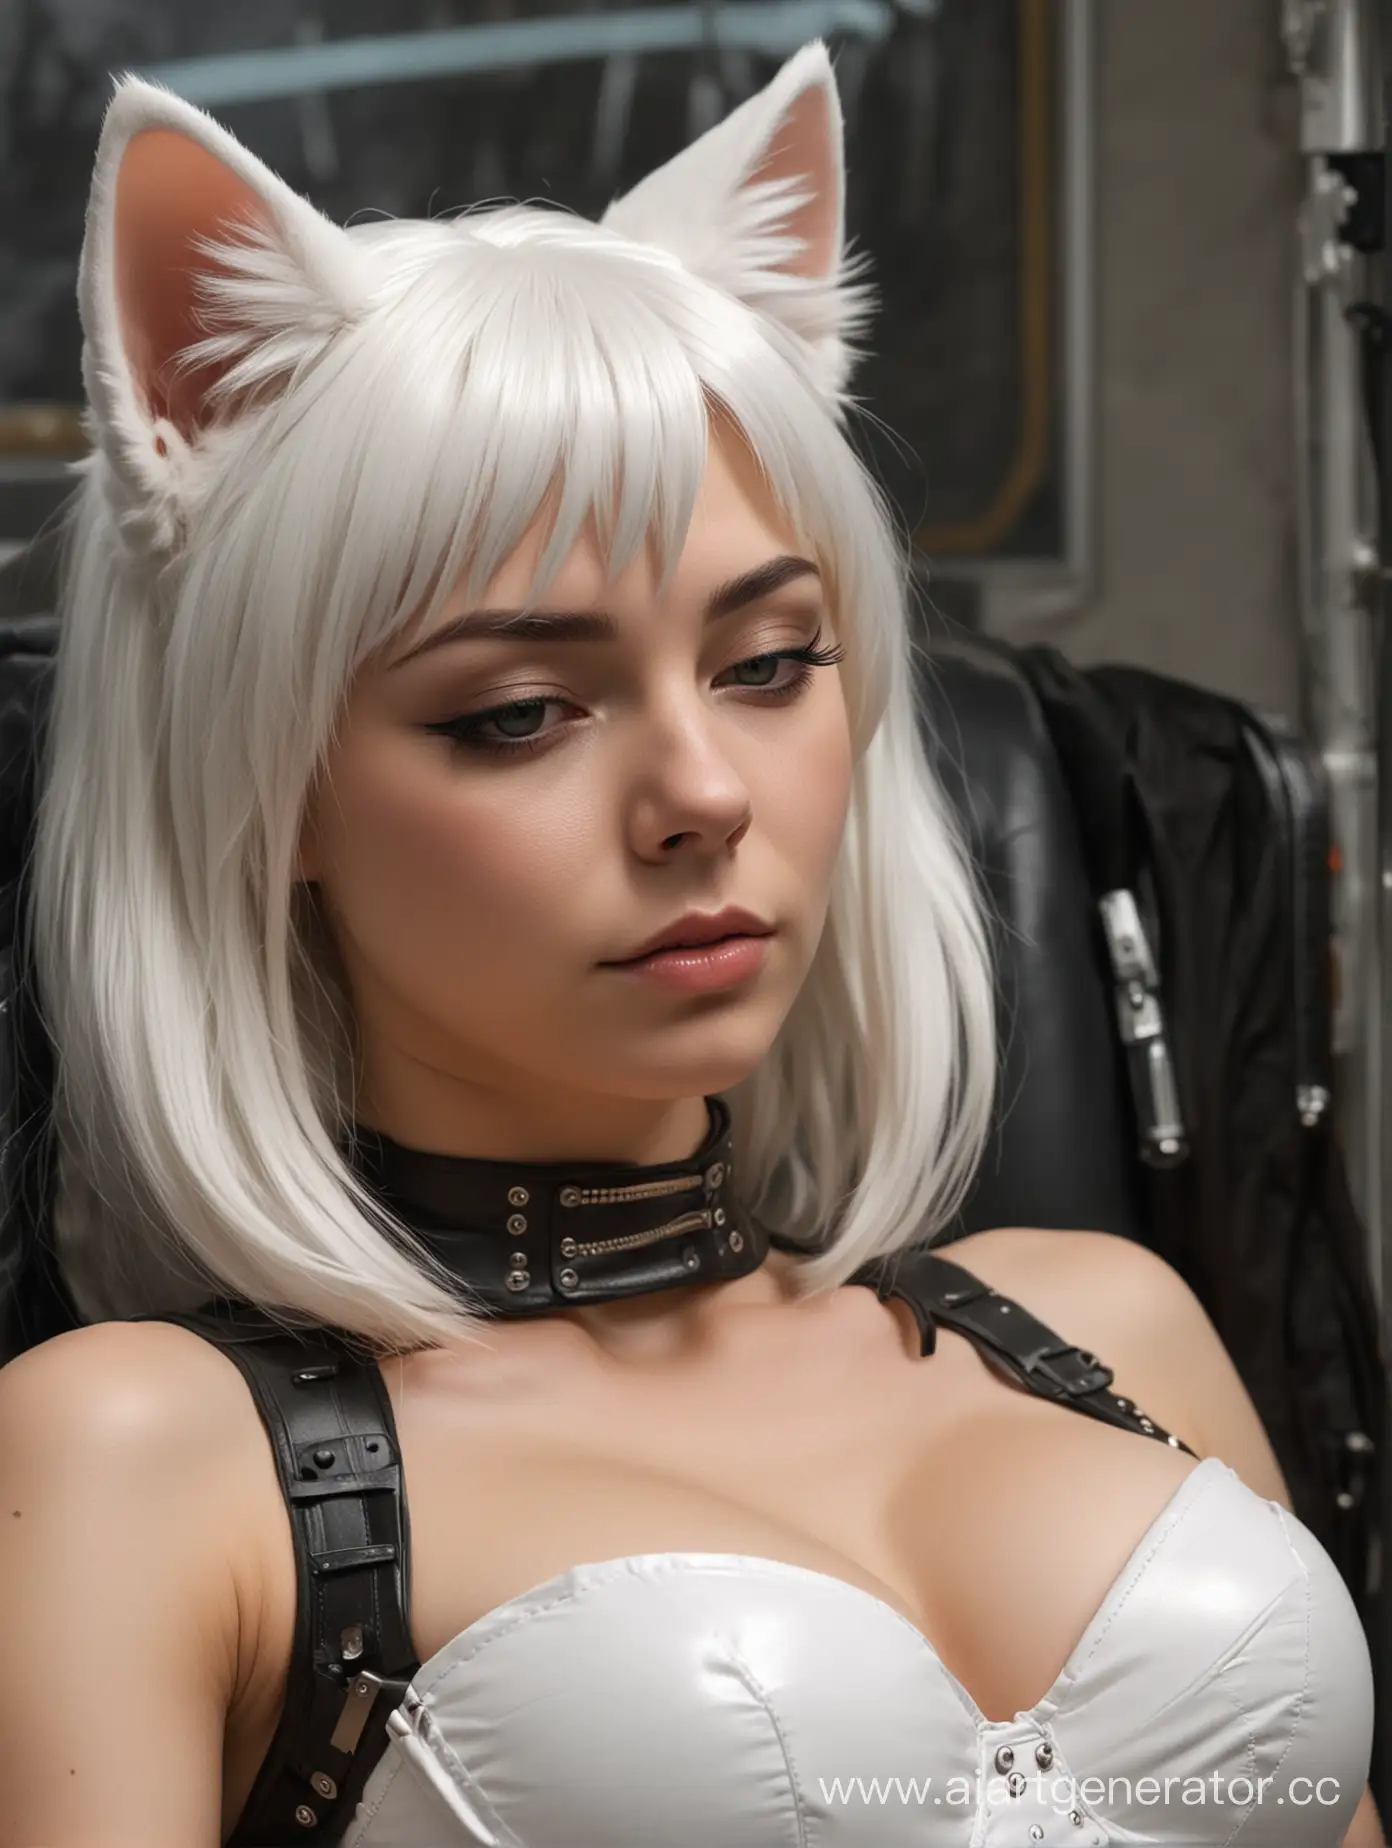 Sleeping synthetic female catgirl, shoulder length white hair, realistic white cat ears, 8k, highly detailed, inside glass sarcophagus, cyberpunk, leather underbust corset, exposed breasts, medium bust, battery indicator, low battery, old sci-fi movie, shot on 16mm film, grainy 16mm film, retro 1970s aesthetic, tubes and wires exposed, carbon fiber legs